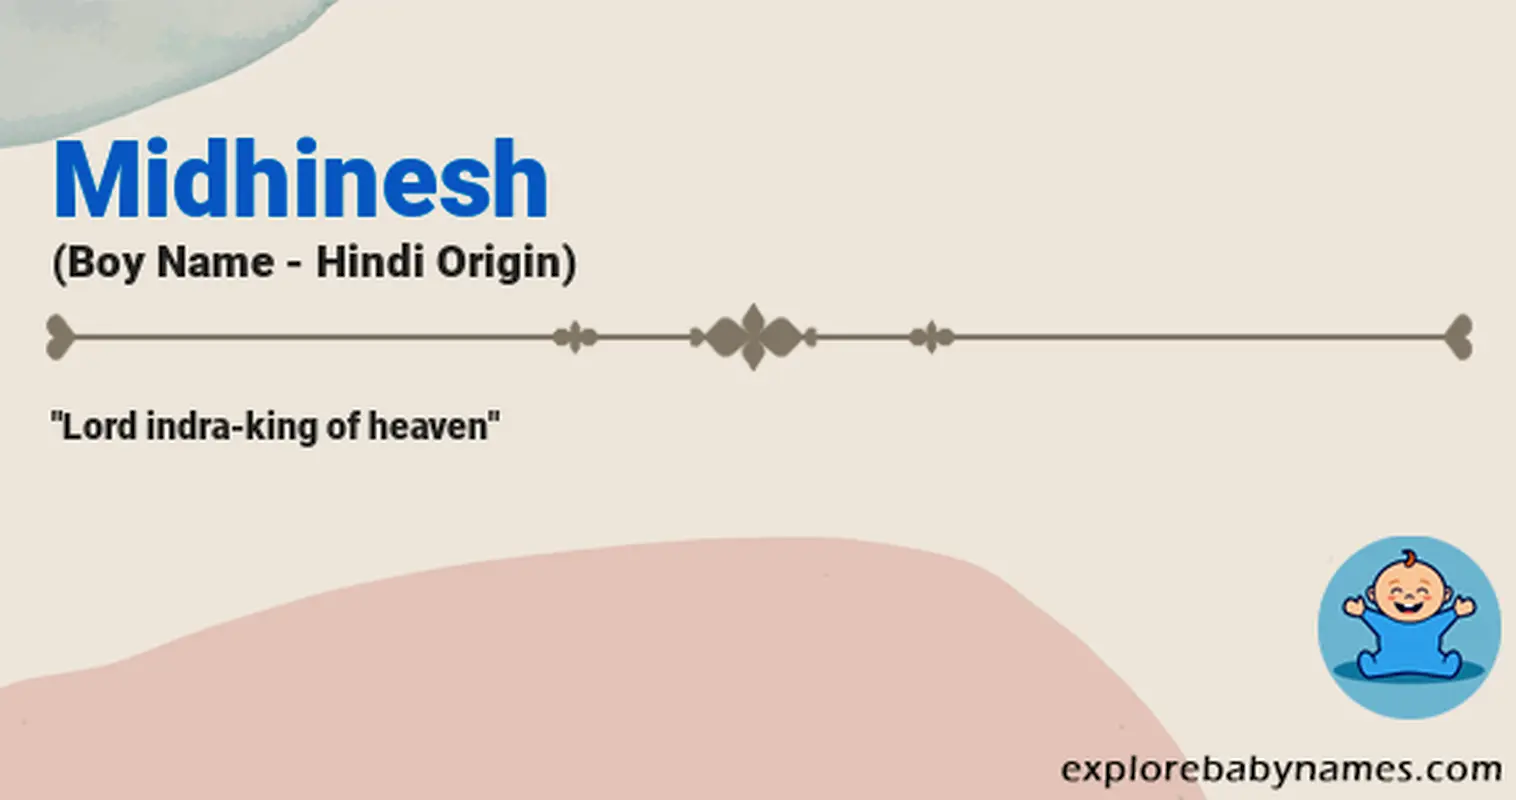 Meaning of Midhinesh